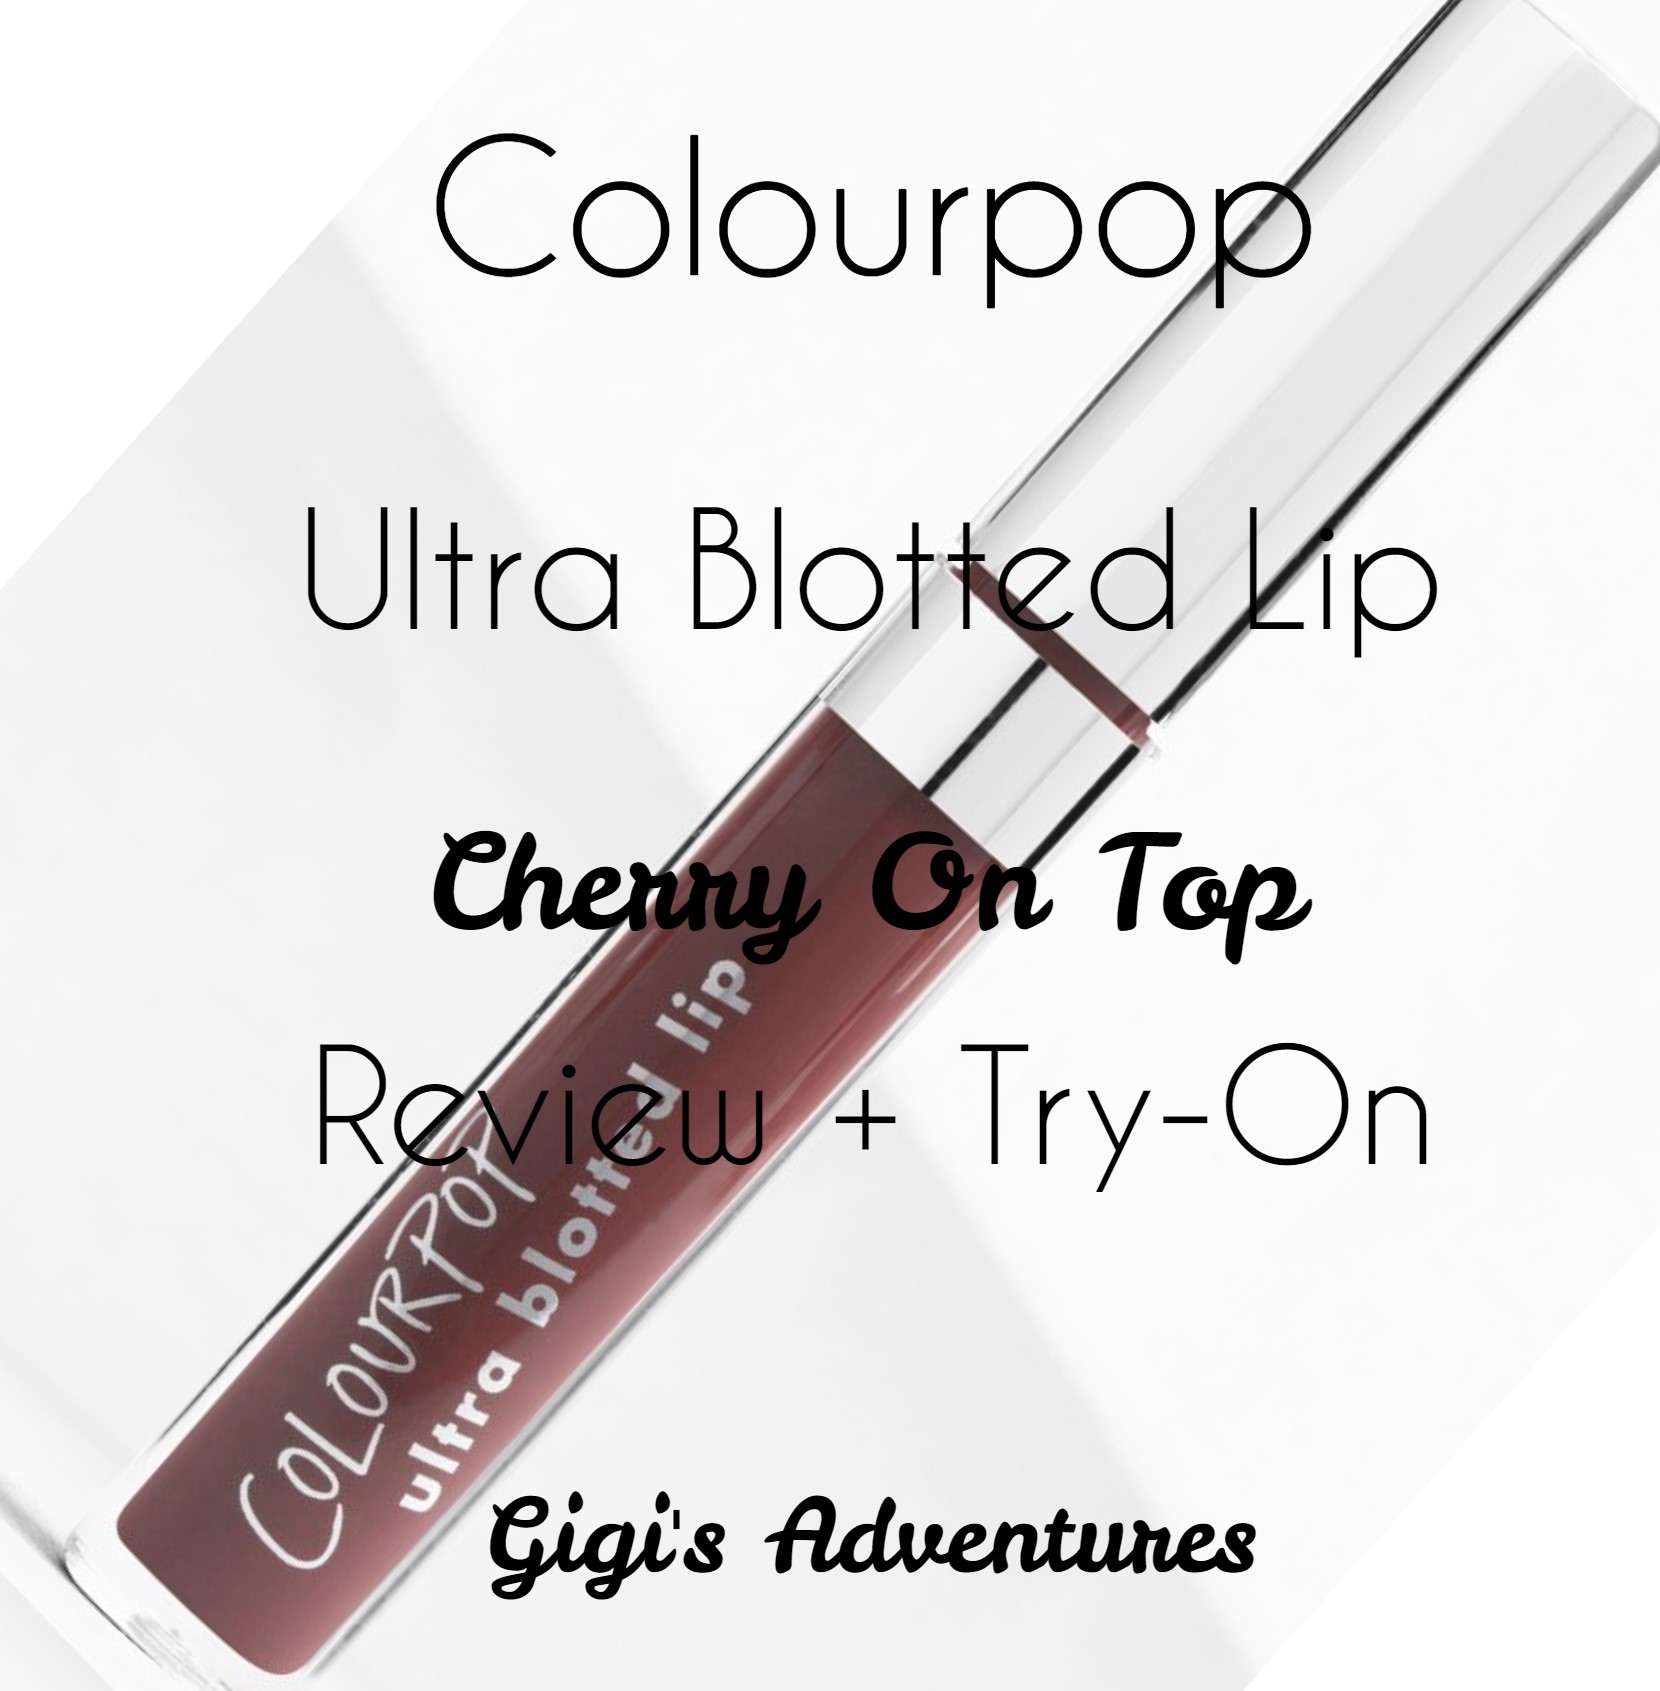 Colourpop Ultra Blotted Lip 'Cherry On Top' Review